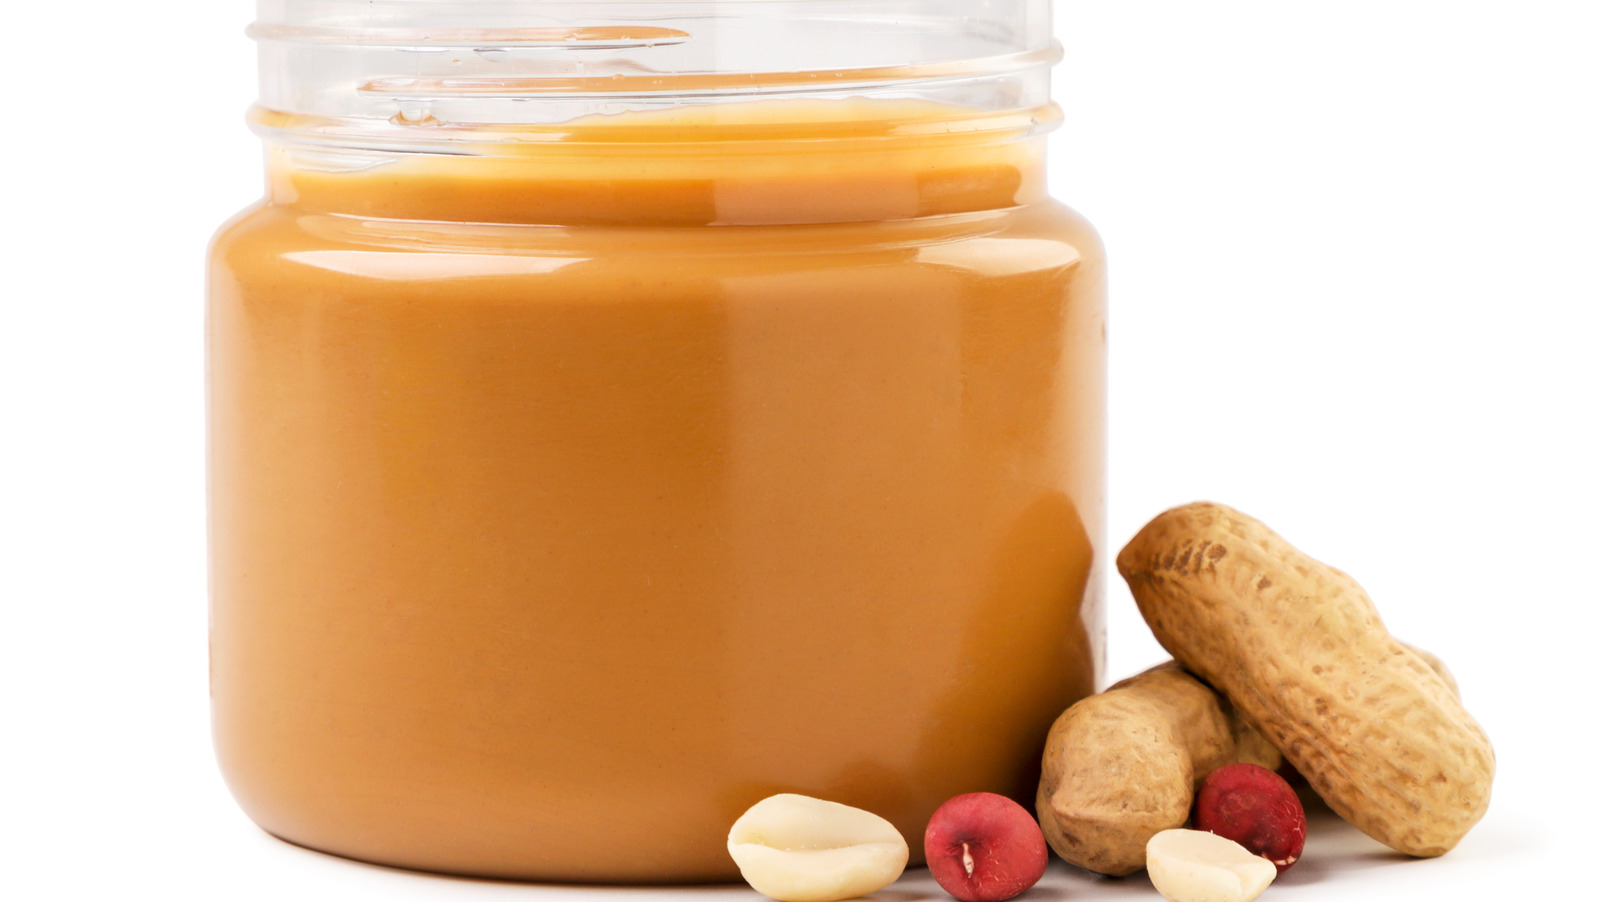 https://www.mashed.com/img/gallery/the-mixer-hack-that-stirs-natural-peanut-butter-without-the-hassle/l-intro-1673732250.jpg